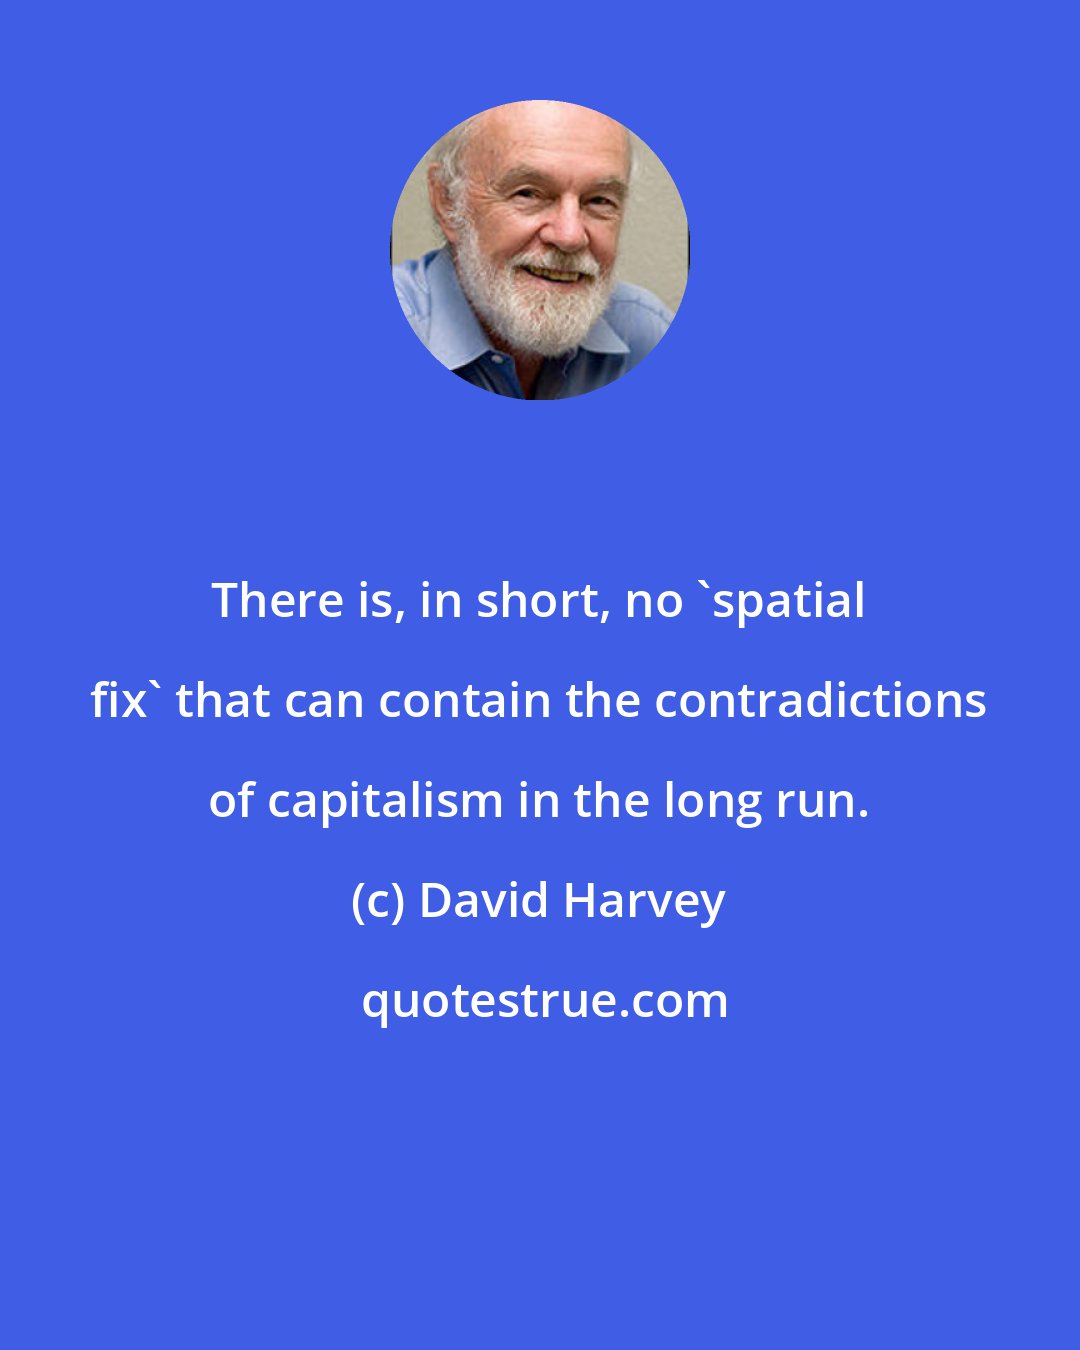 David Harvey: There is, in short, no 'spatial fix' that can contain the contradictions of capitalism in the long run.